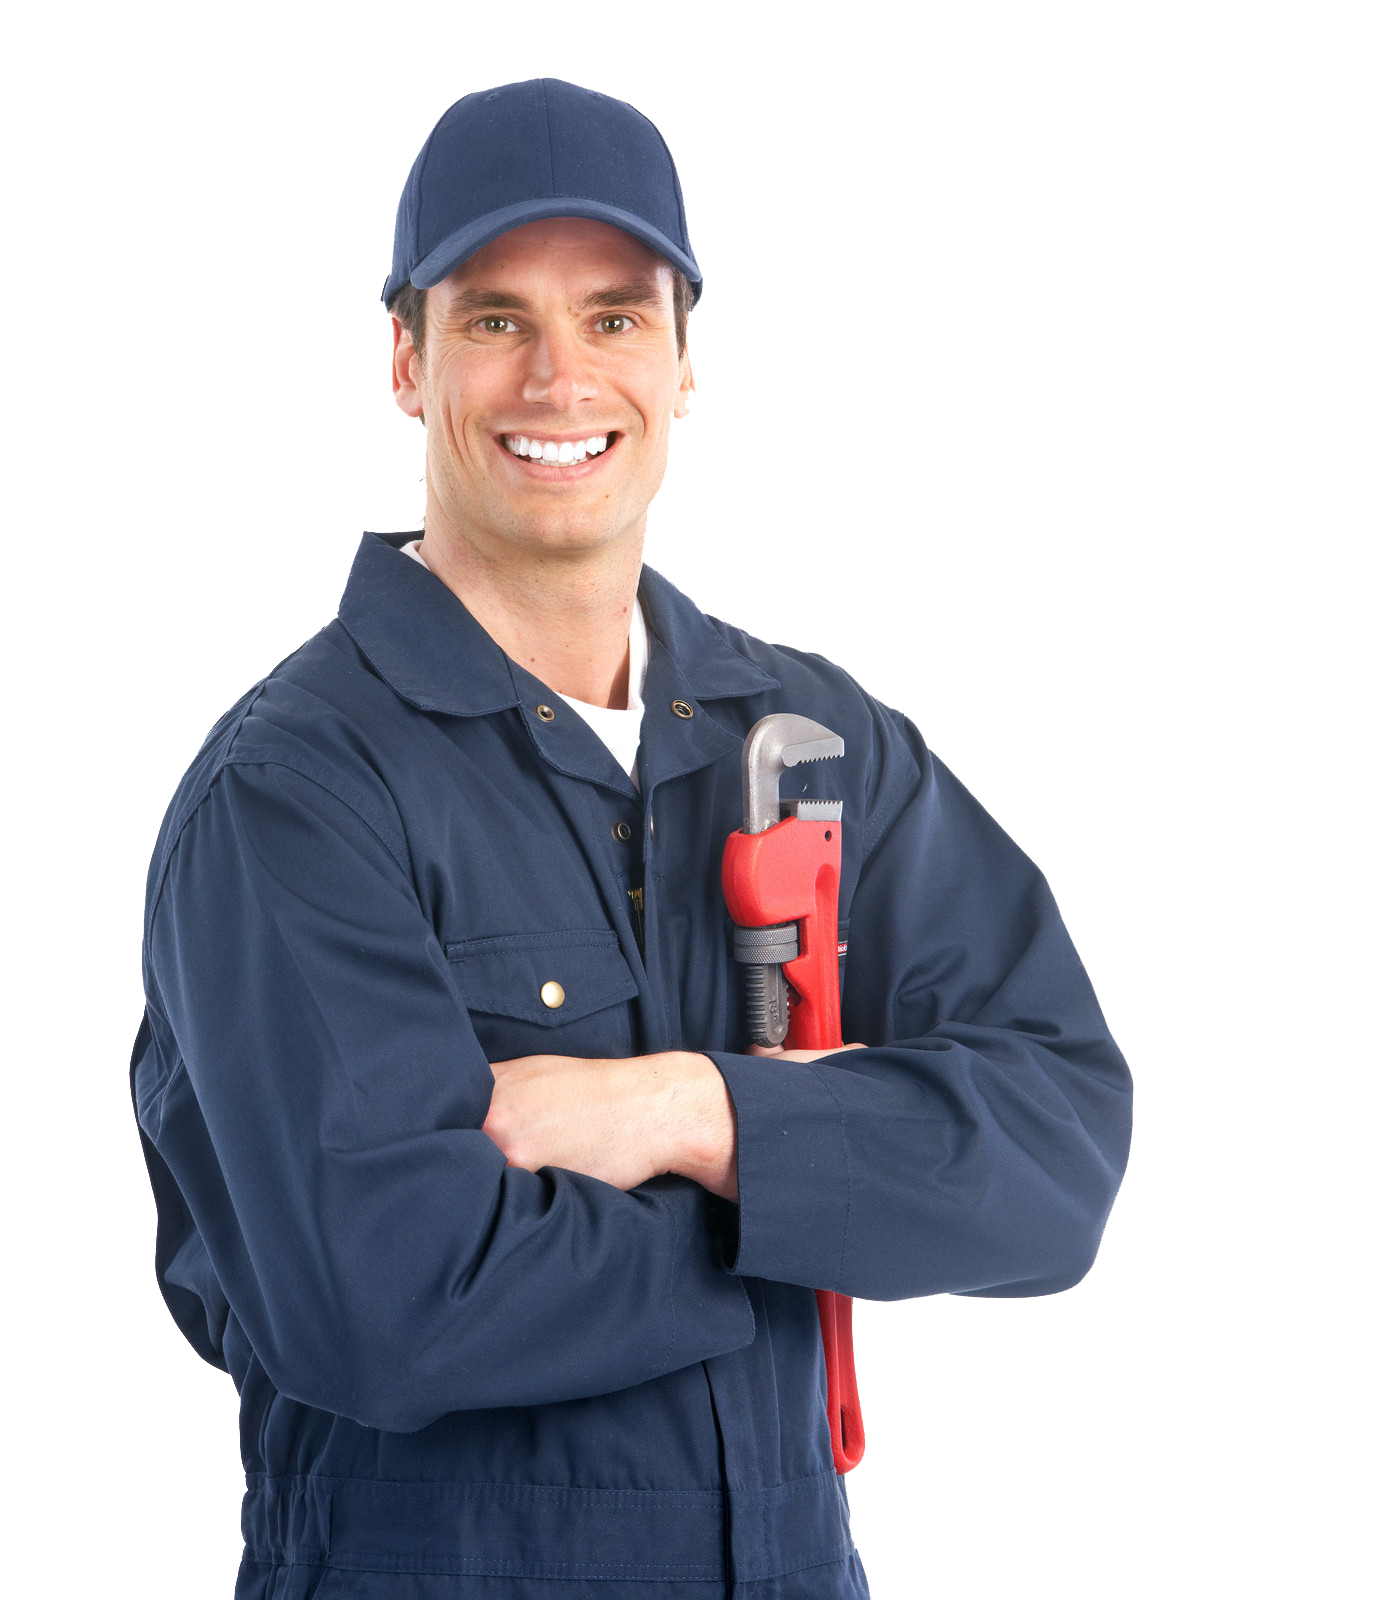 Worker Industrial Architect HD Image Free PNG Image